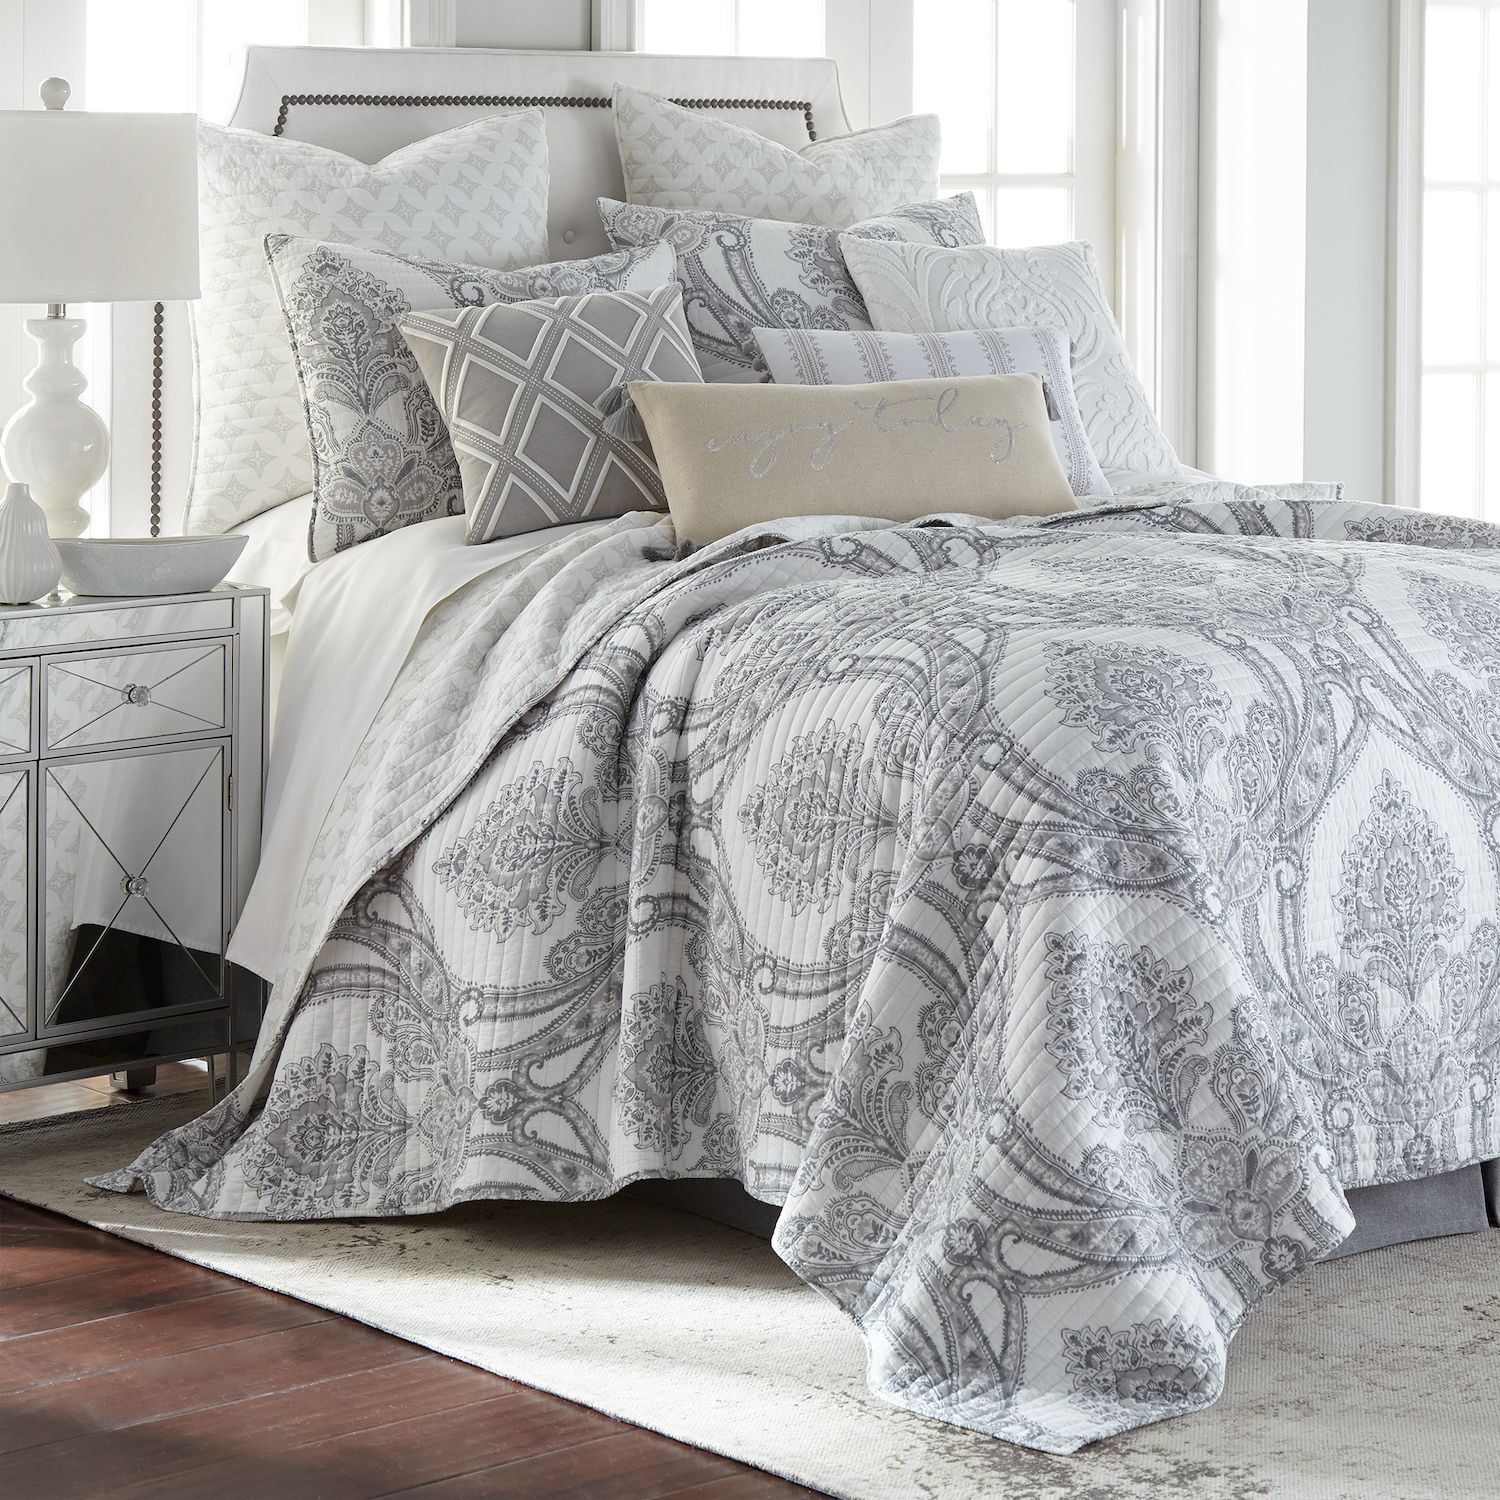 Image for Levtex Home Novara Gray Quilt Set with Shams at Kohl's.